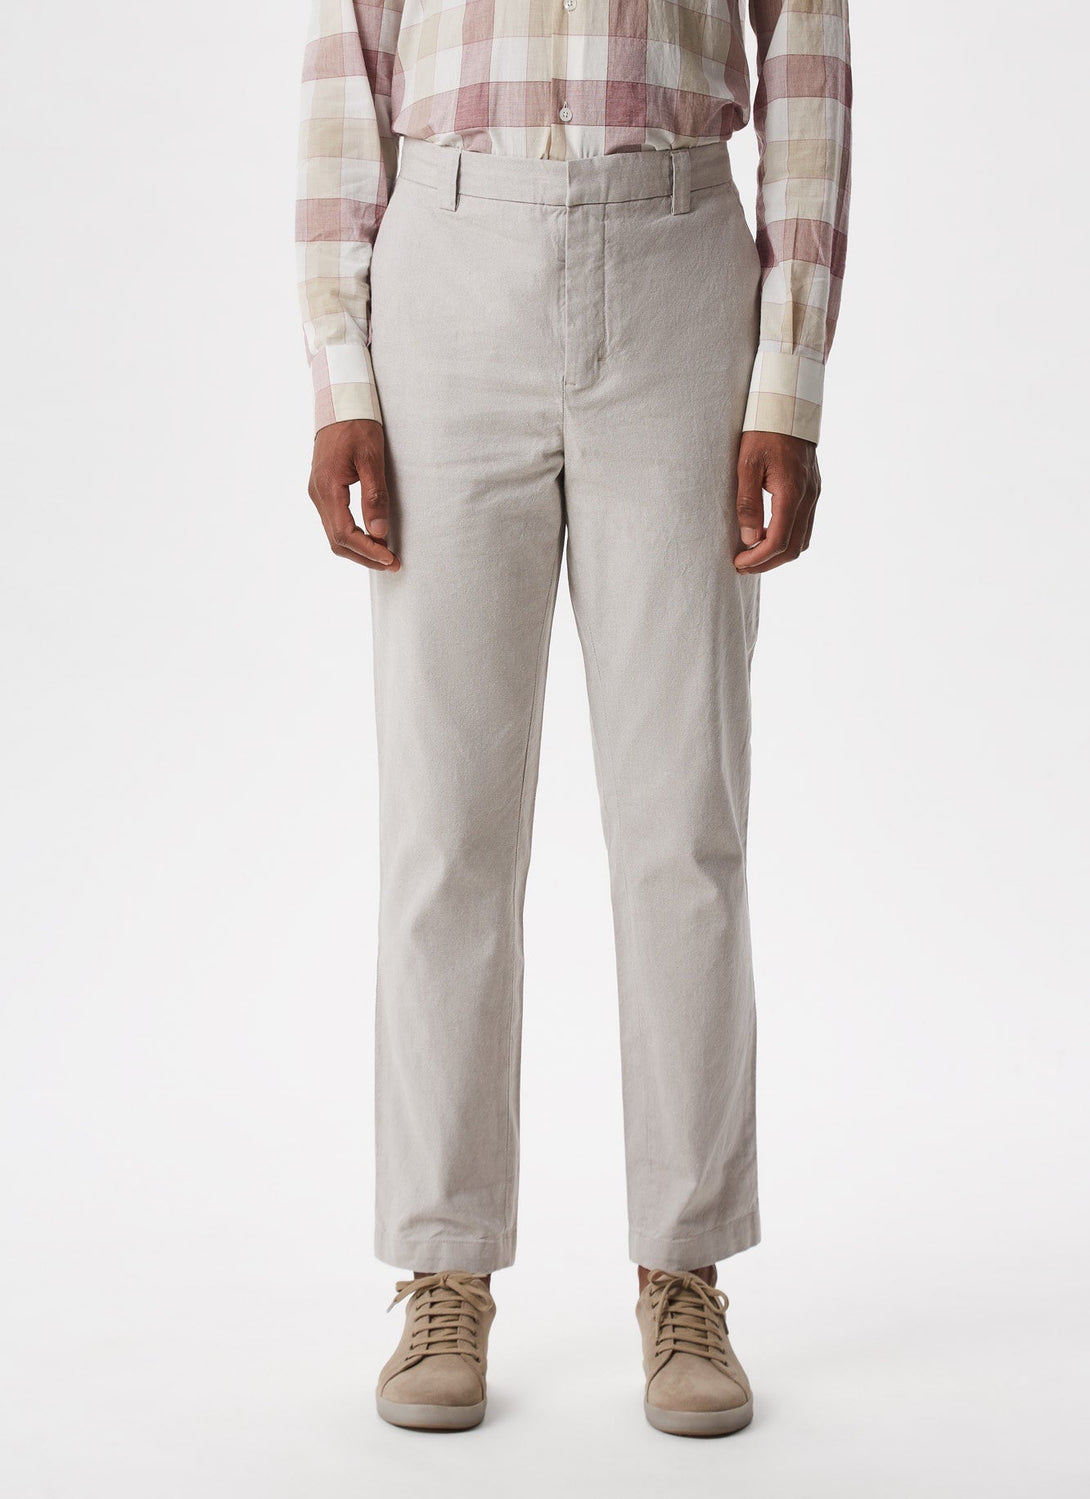 Men Trousers | Sand Textured Elastic Chino Trousers by Spanish designer Adolfo Dominguez